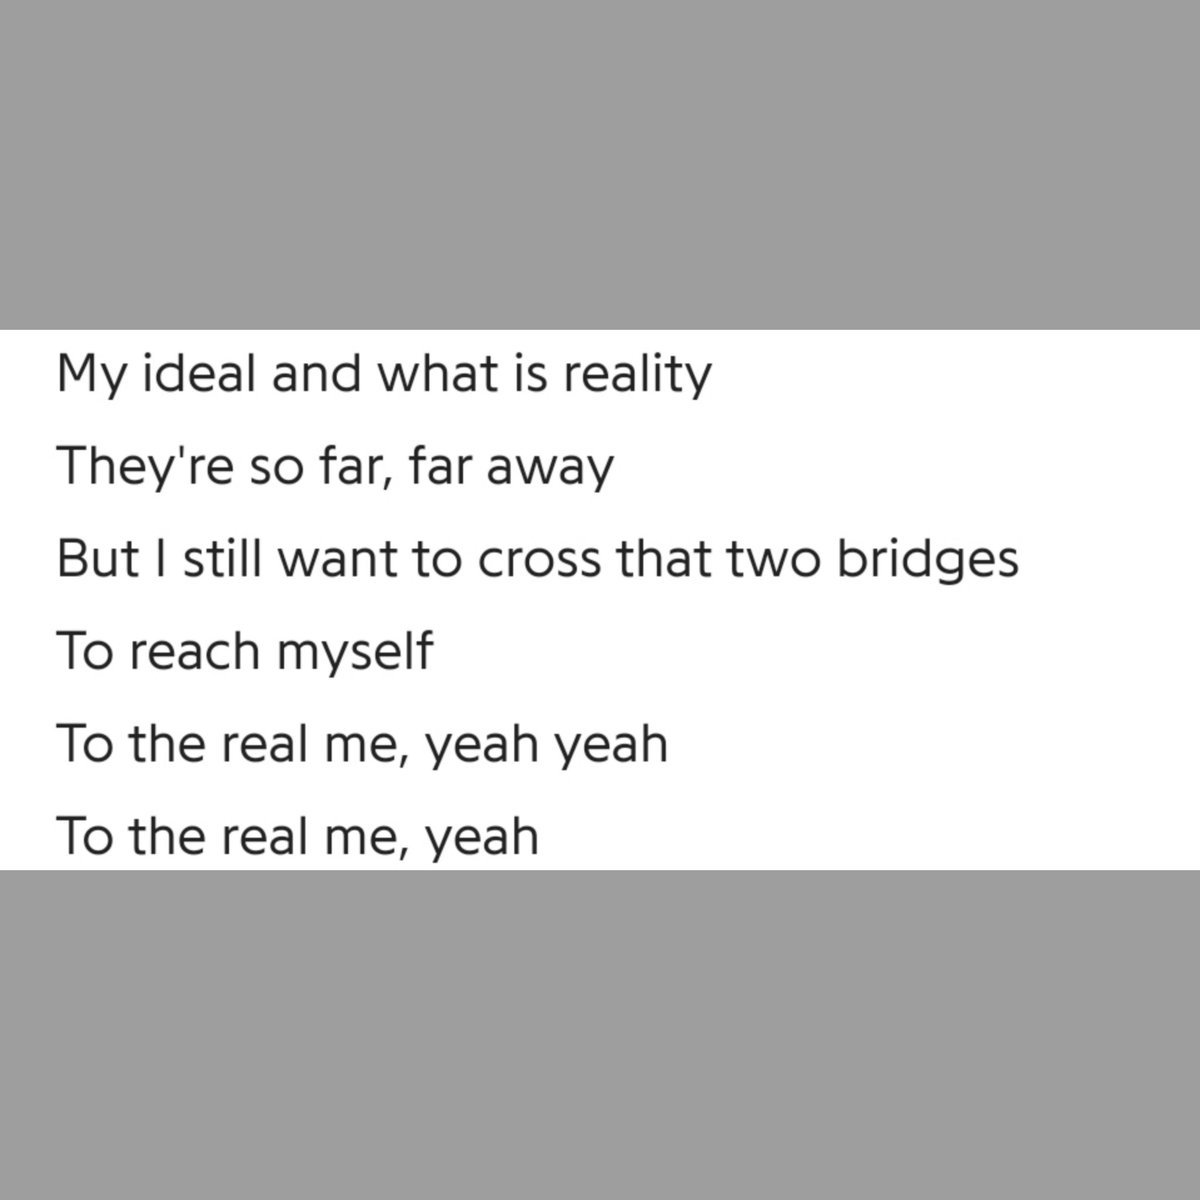 Reality, They're so, so far away": we know well that the life n work of an Hip Hop Artists n Idol are absolutely poles apart but Joon still wishes to "cross that two bridges to reach myself, to the real me", Joon uses "bridge" as a metaphor for "connections" and how he wishes to+